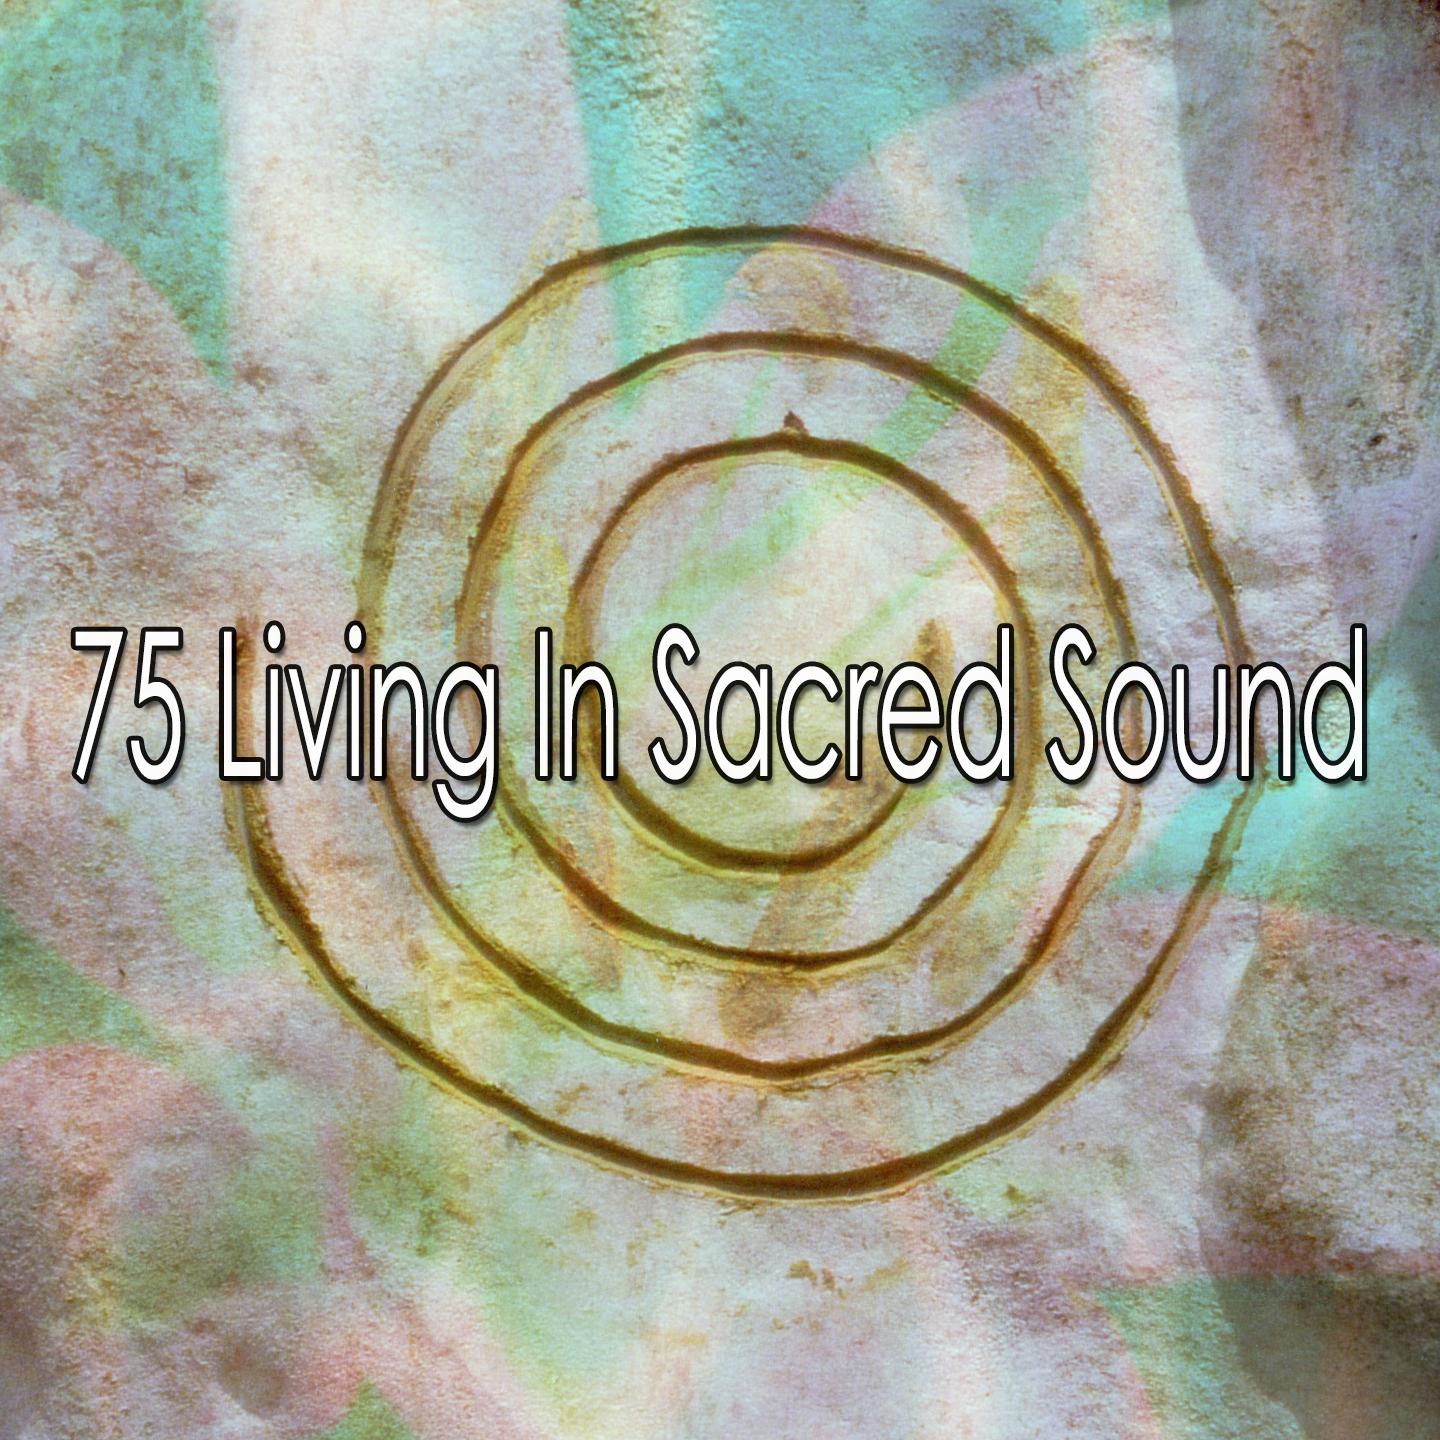 75 Living In Sacred Sound